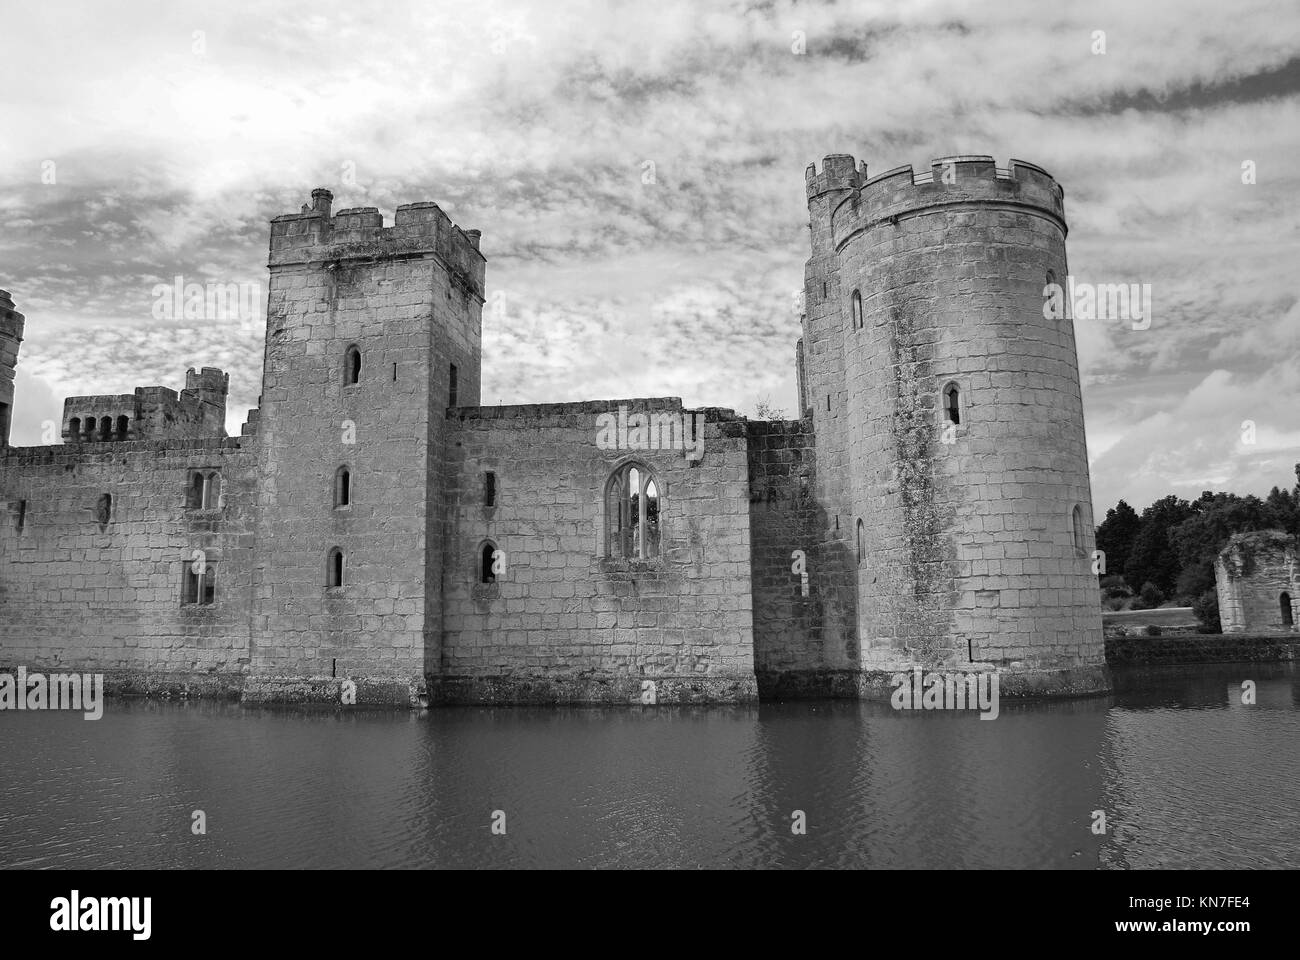 The 14th Century moated castle at Bodiam in East Sussex, England on August 20, 2012. Stock Photo